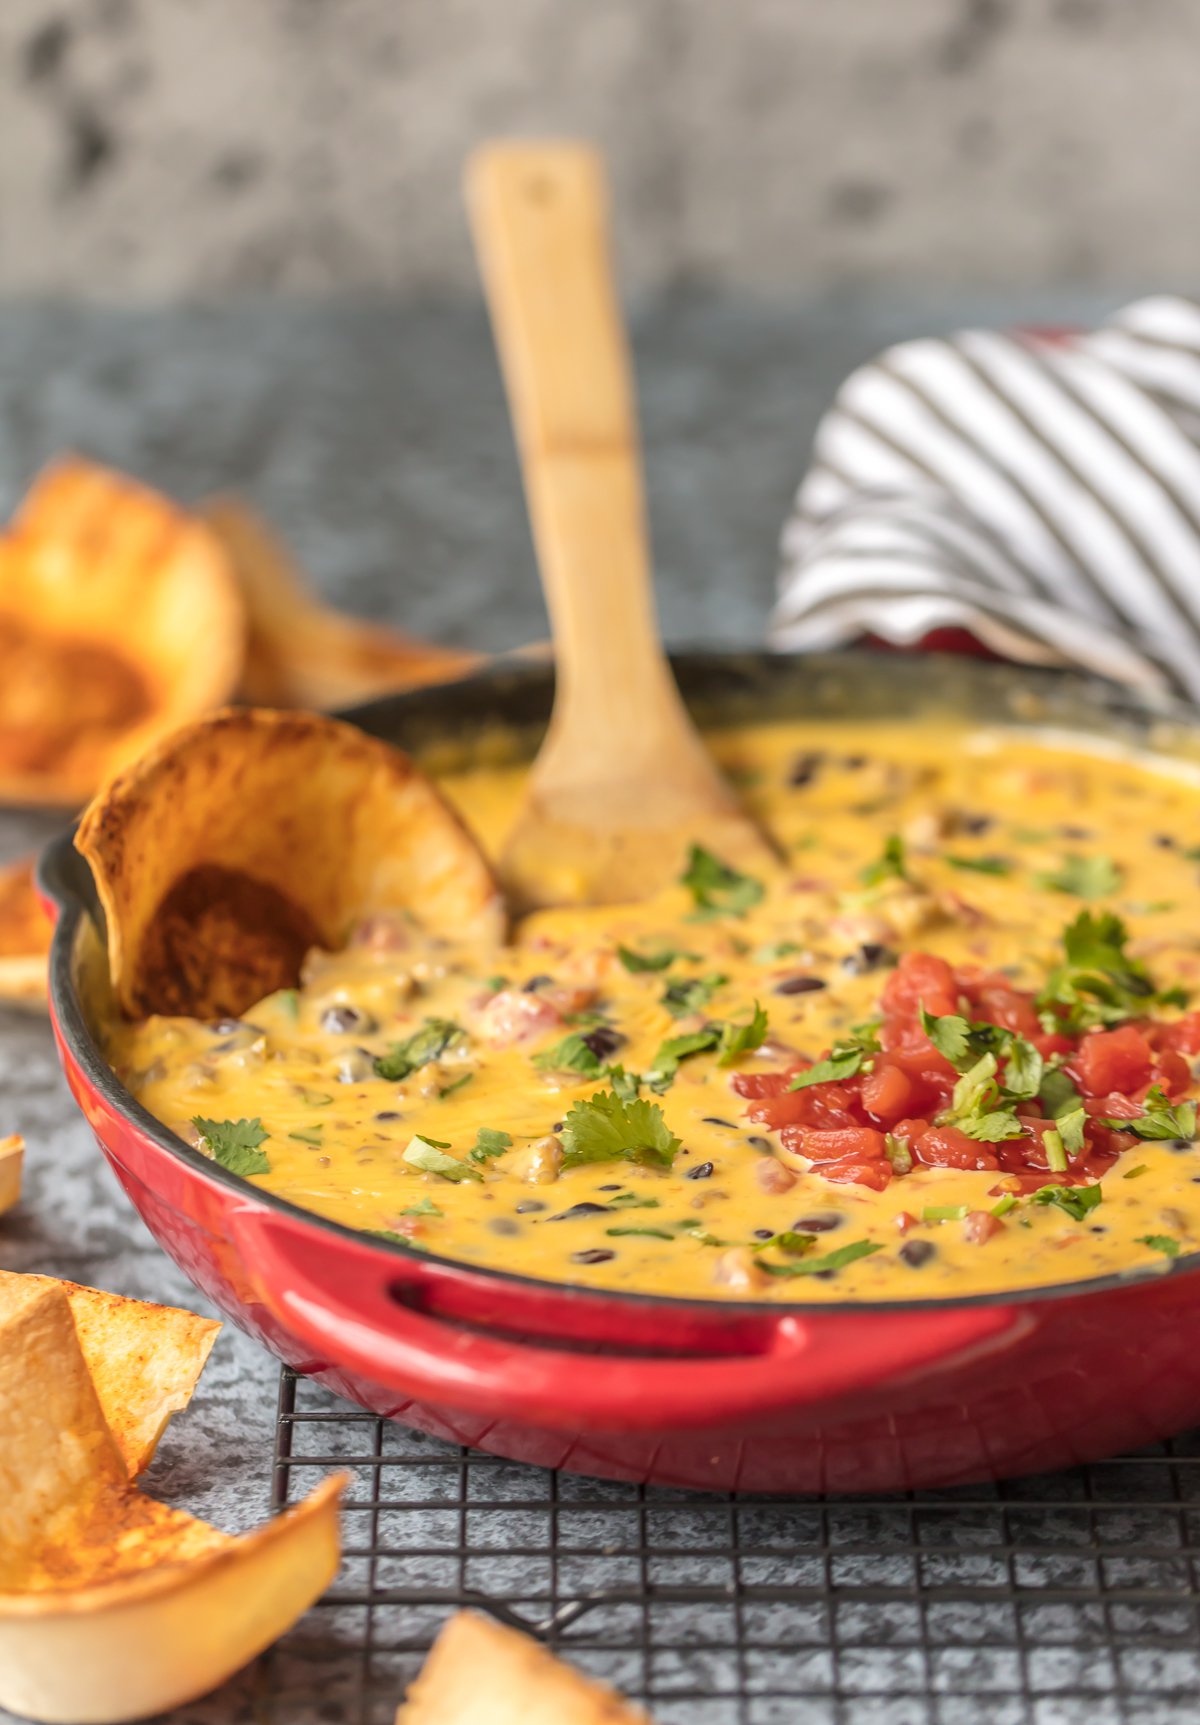 Recipe: Loaded Cowboy Queso/Chips